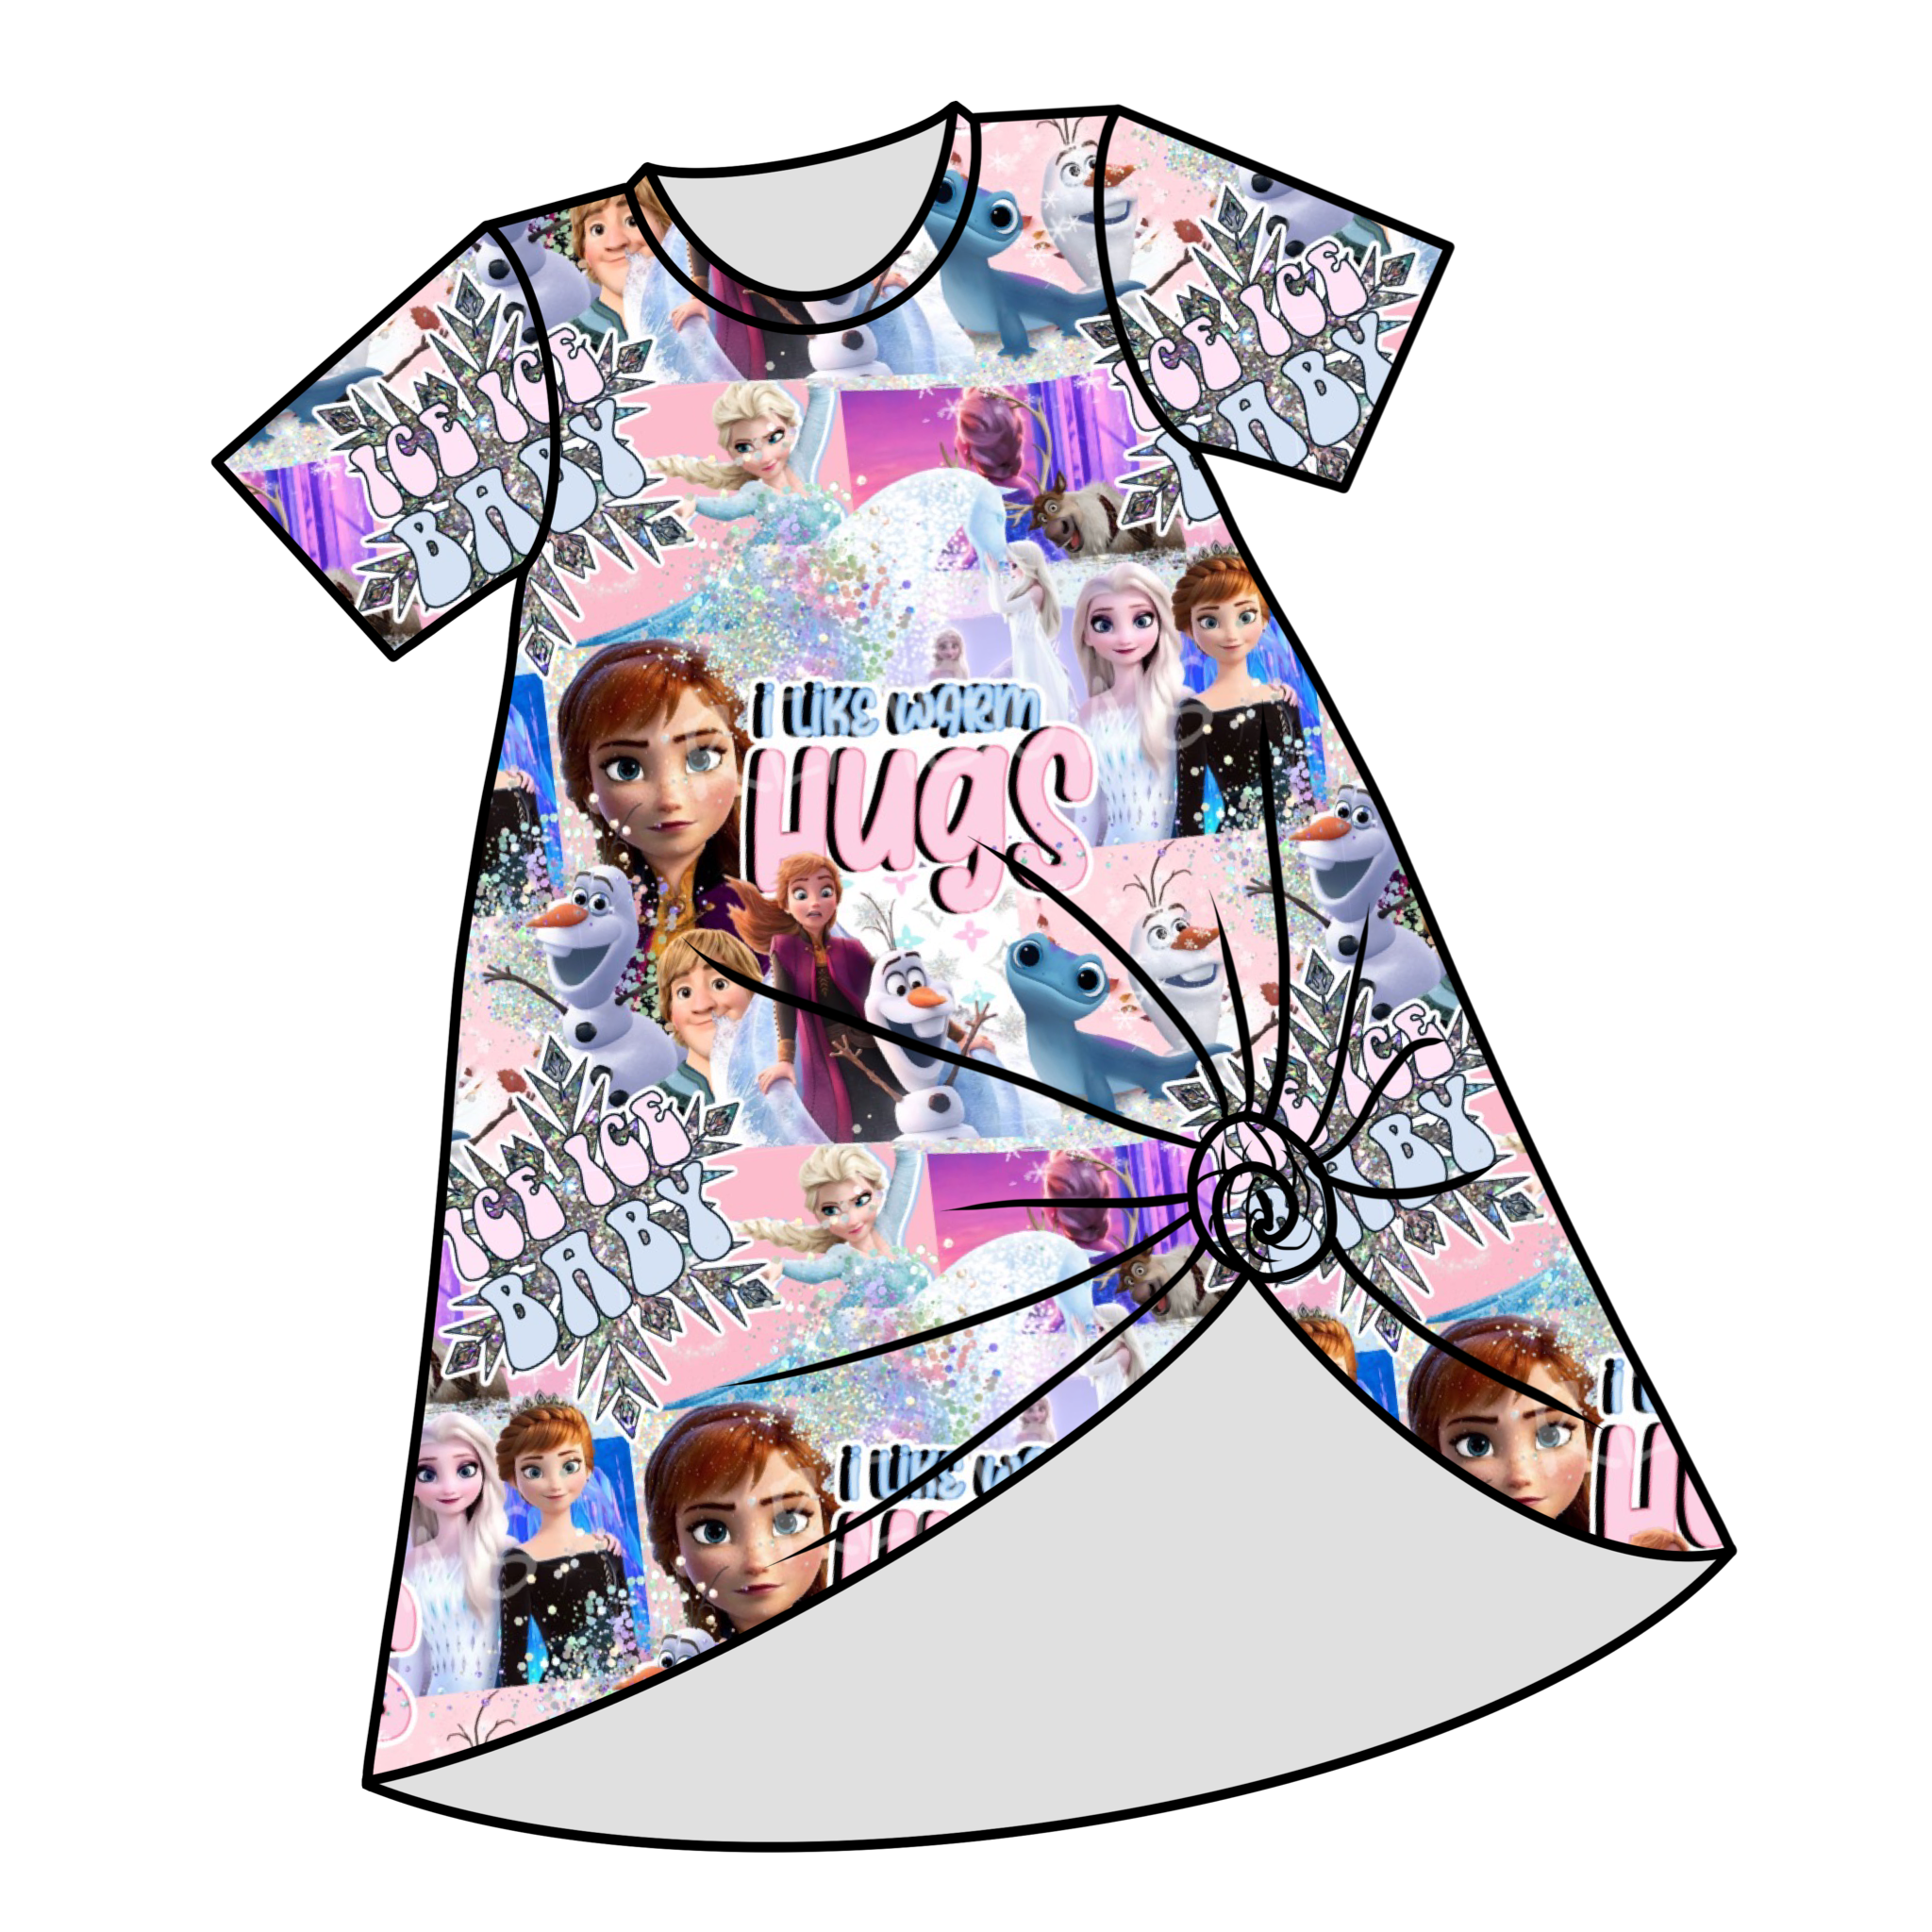 Frozen Clothing Options (with coordinating prints)